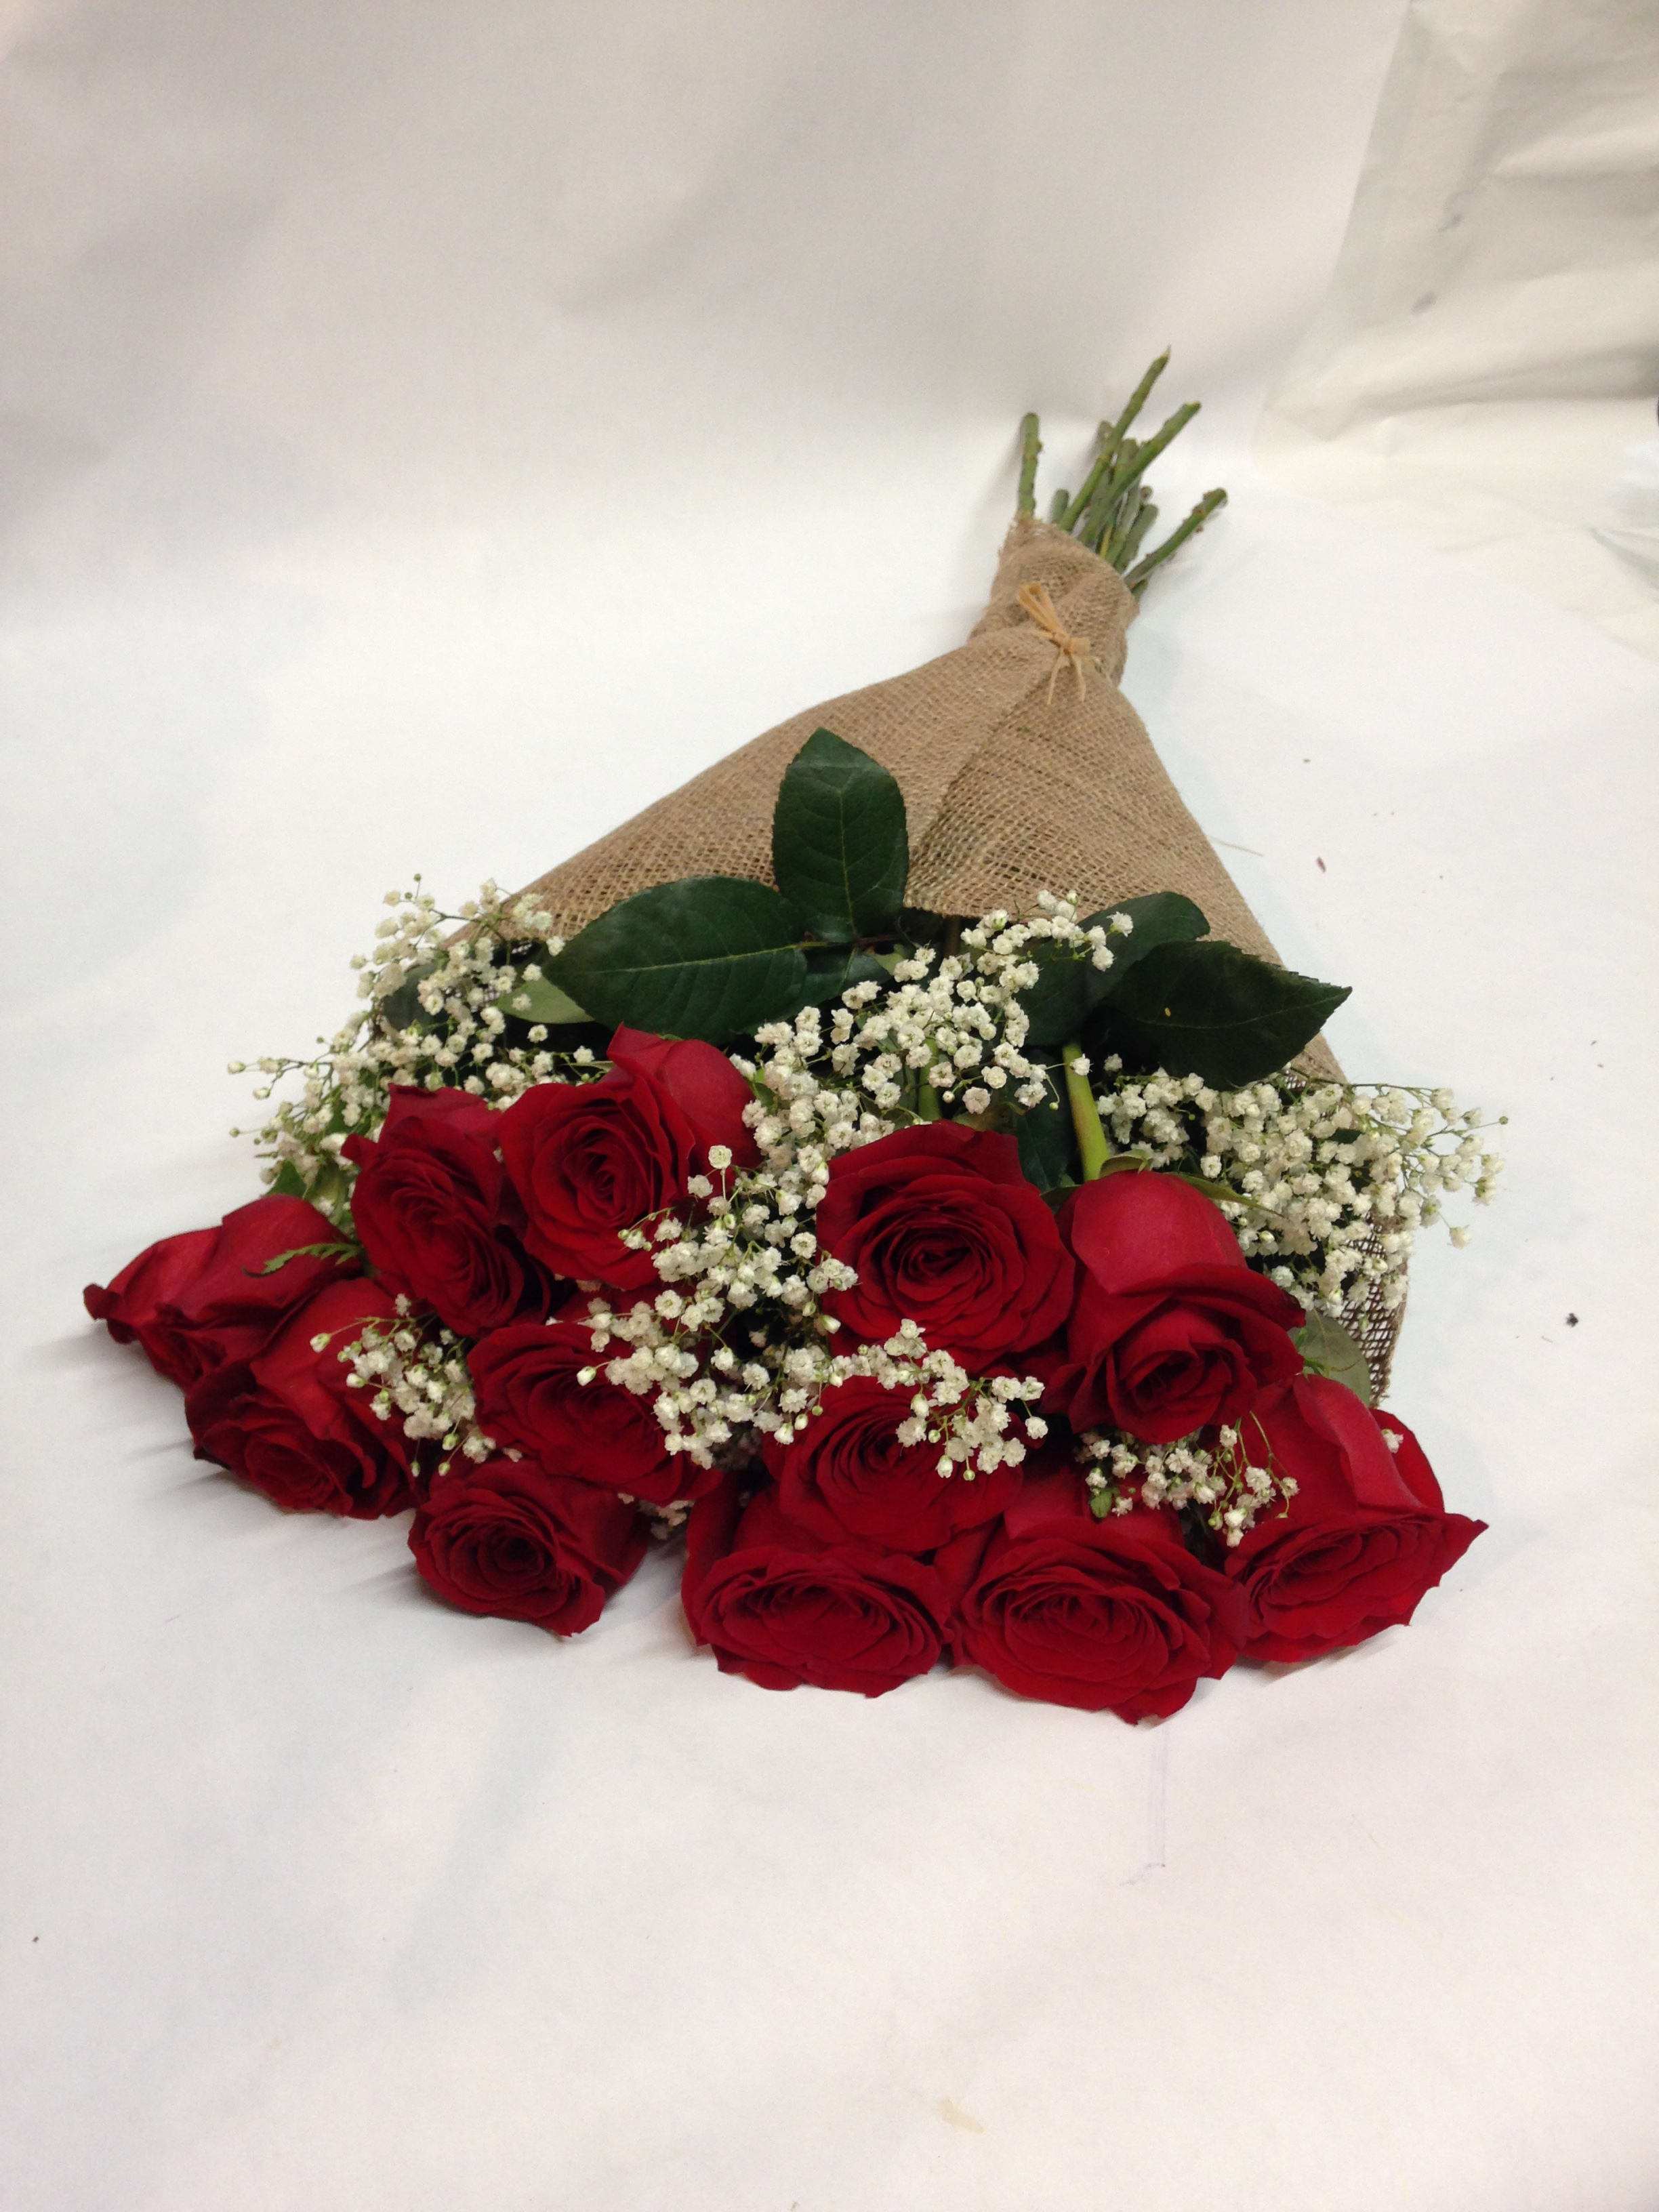 Burlap Wrapped Bouquets, Flower Delivery